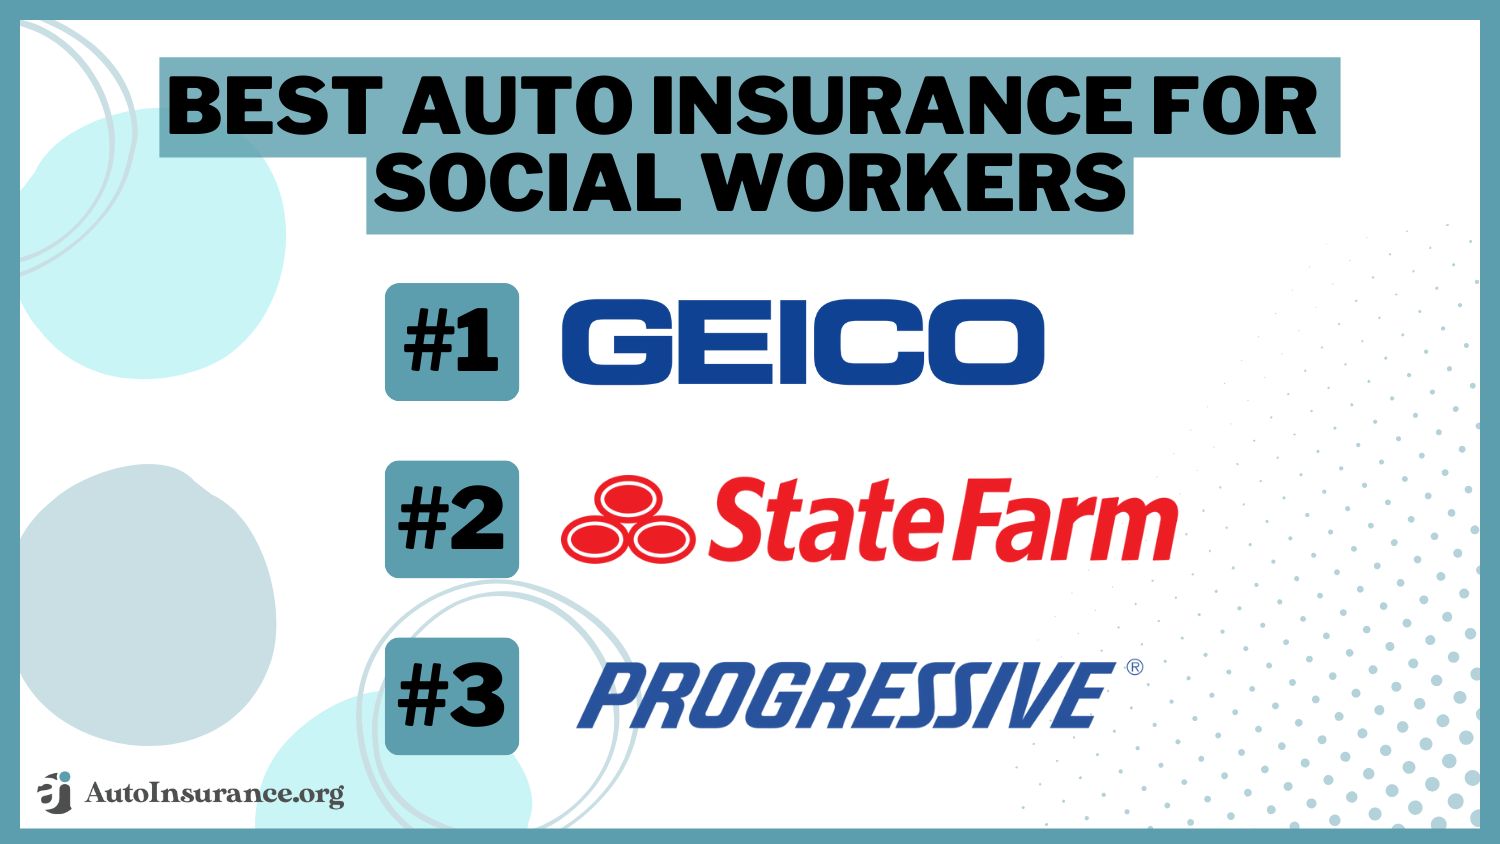 Geico, State Farm, Progressive: Best Auto Insurance for Social Workers